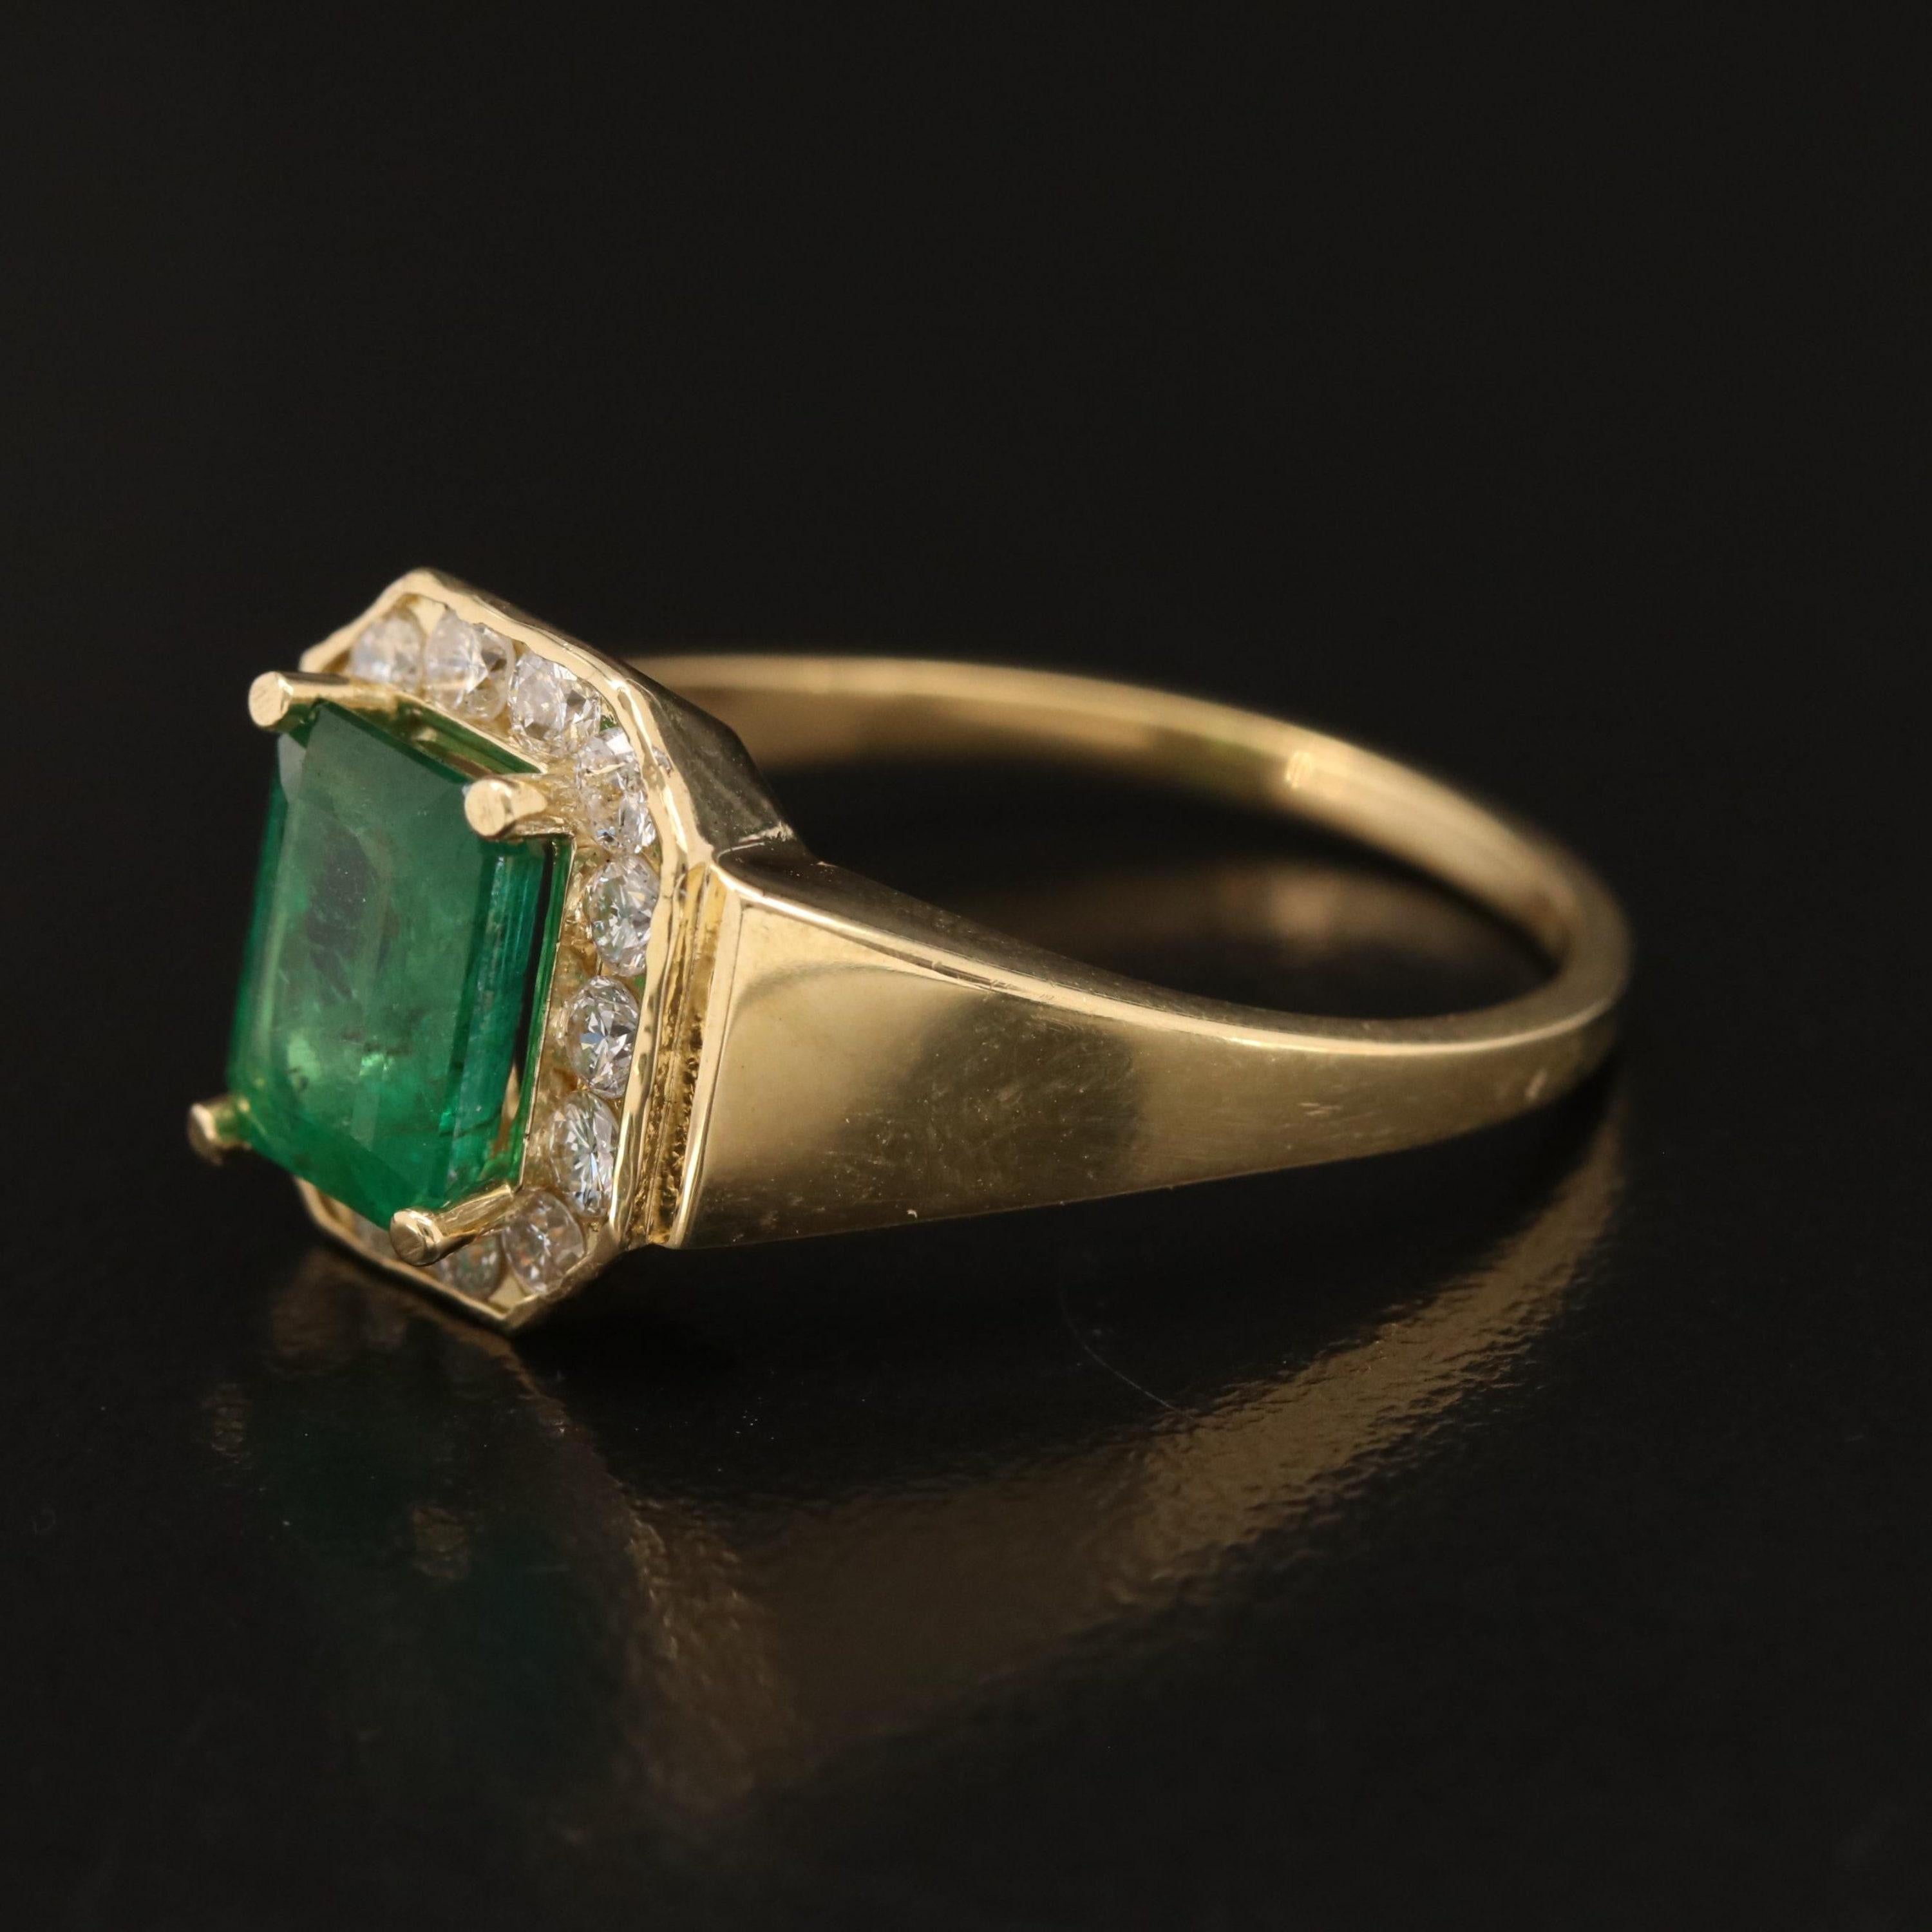 For Sale:  Halo Emerald Diamond Engagement Ring, Emerald Cut Emerald Wedding Ring for Her 2